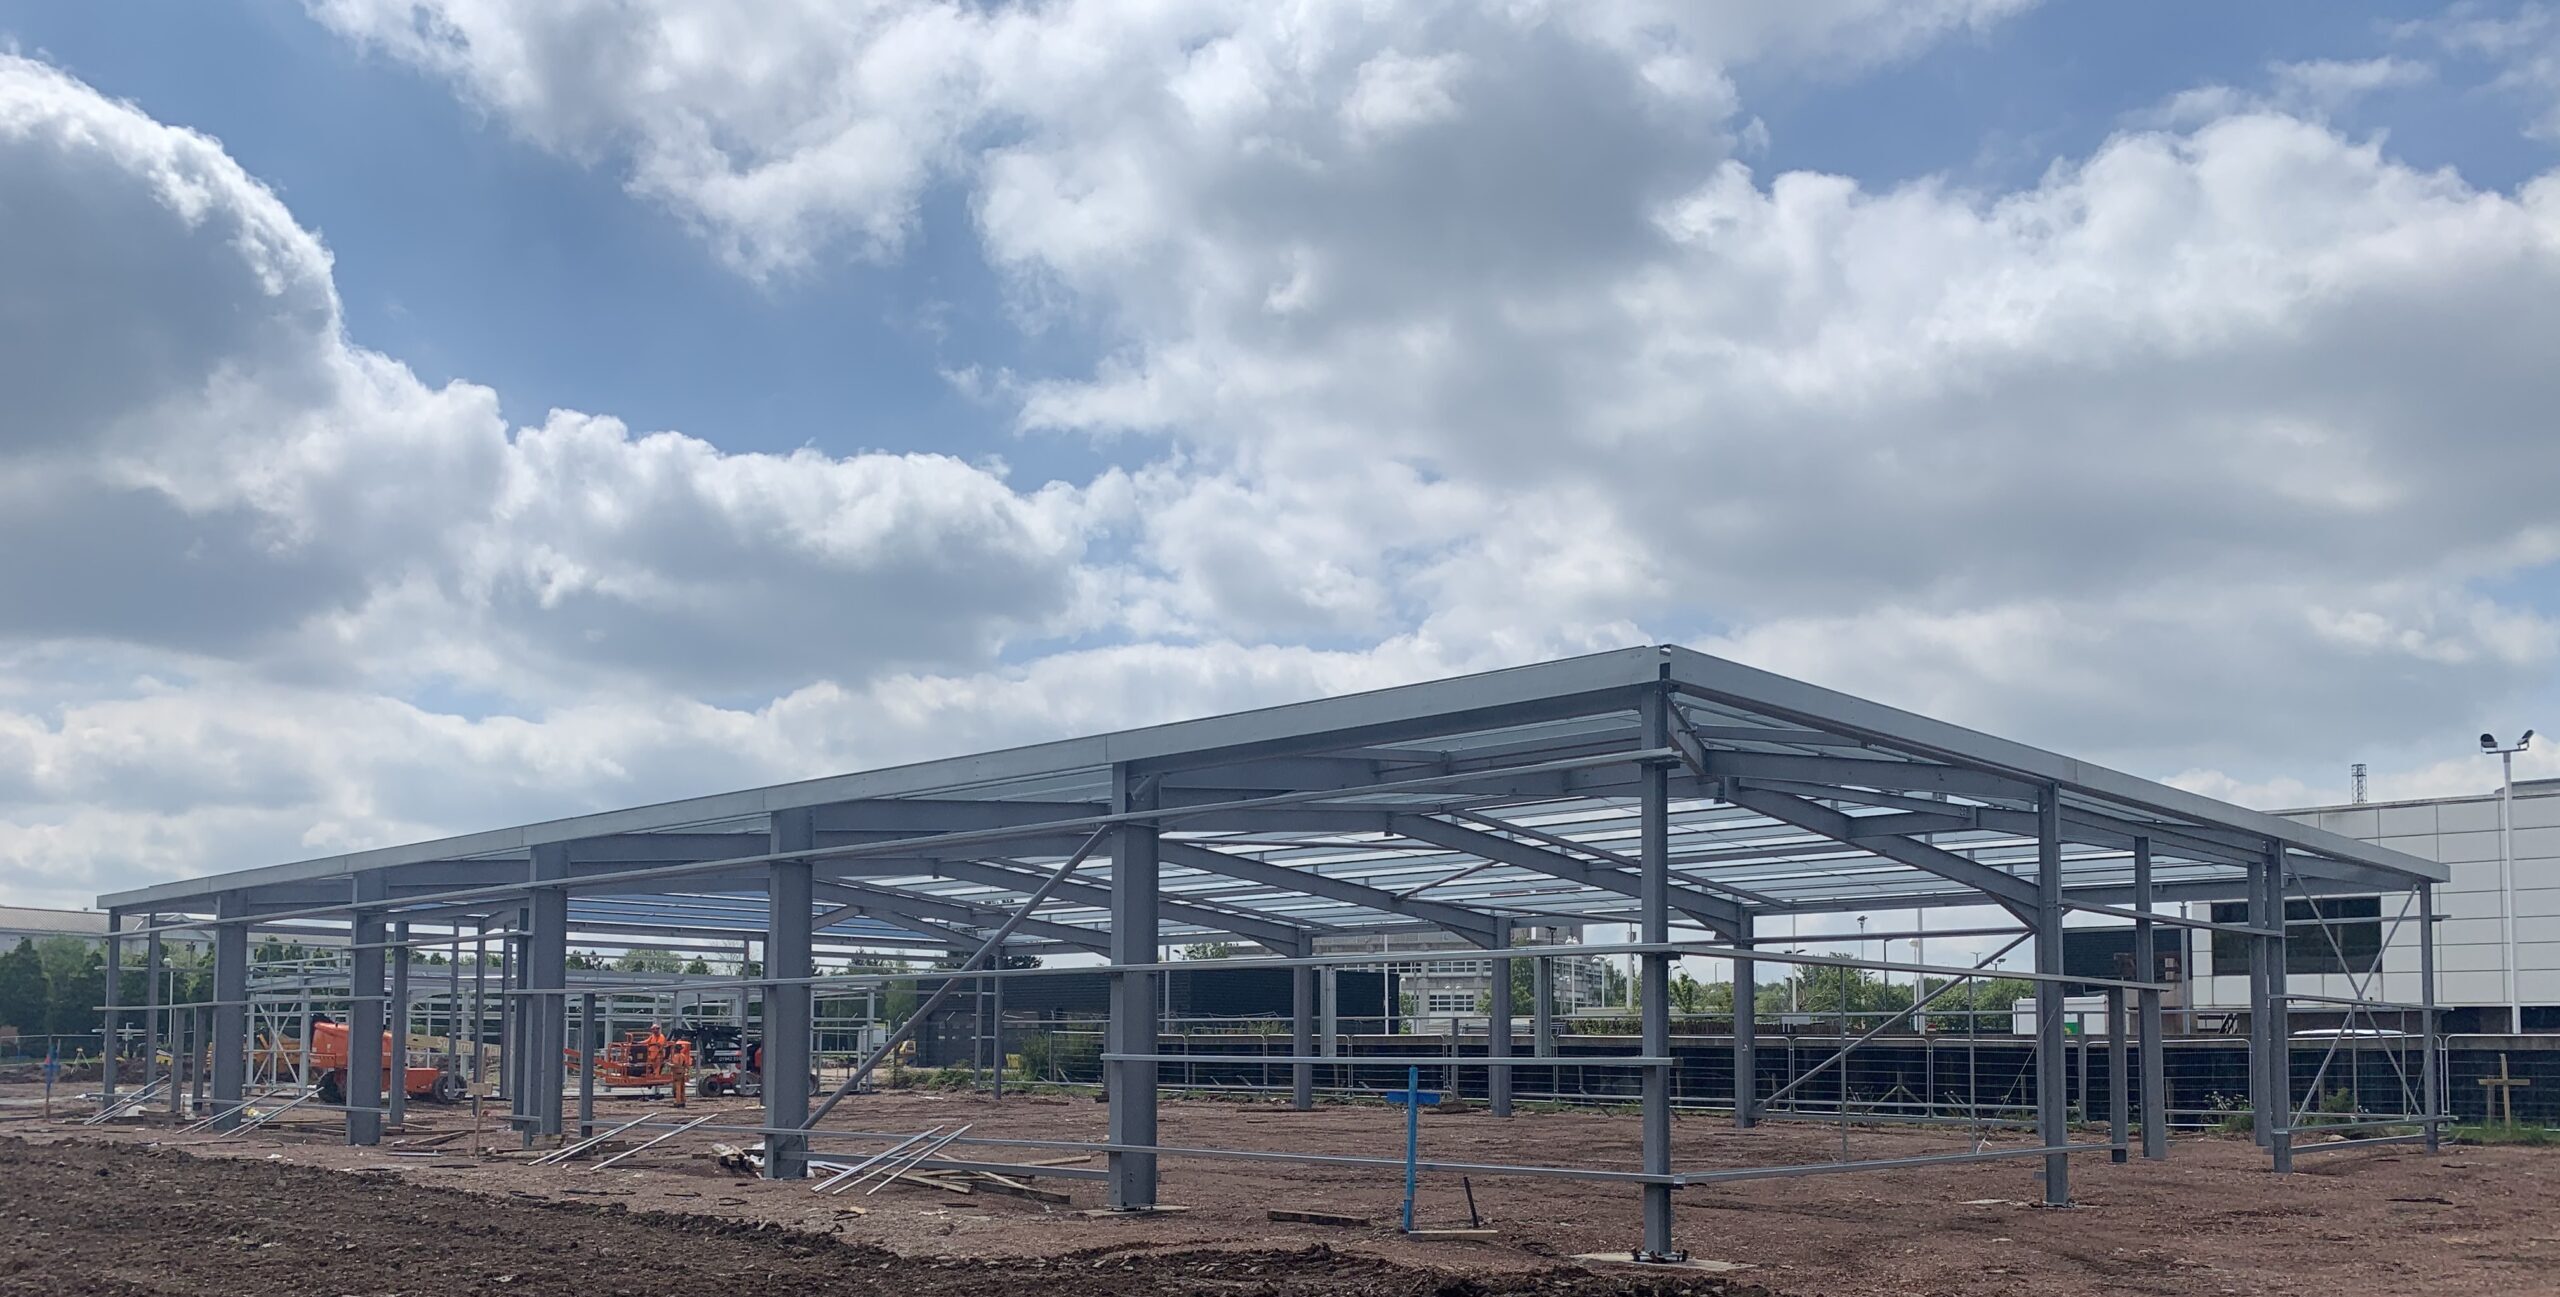 A full view image of the steel frame in progress at Ferrari in Leeds